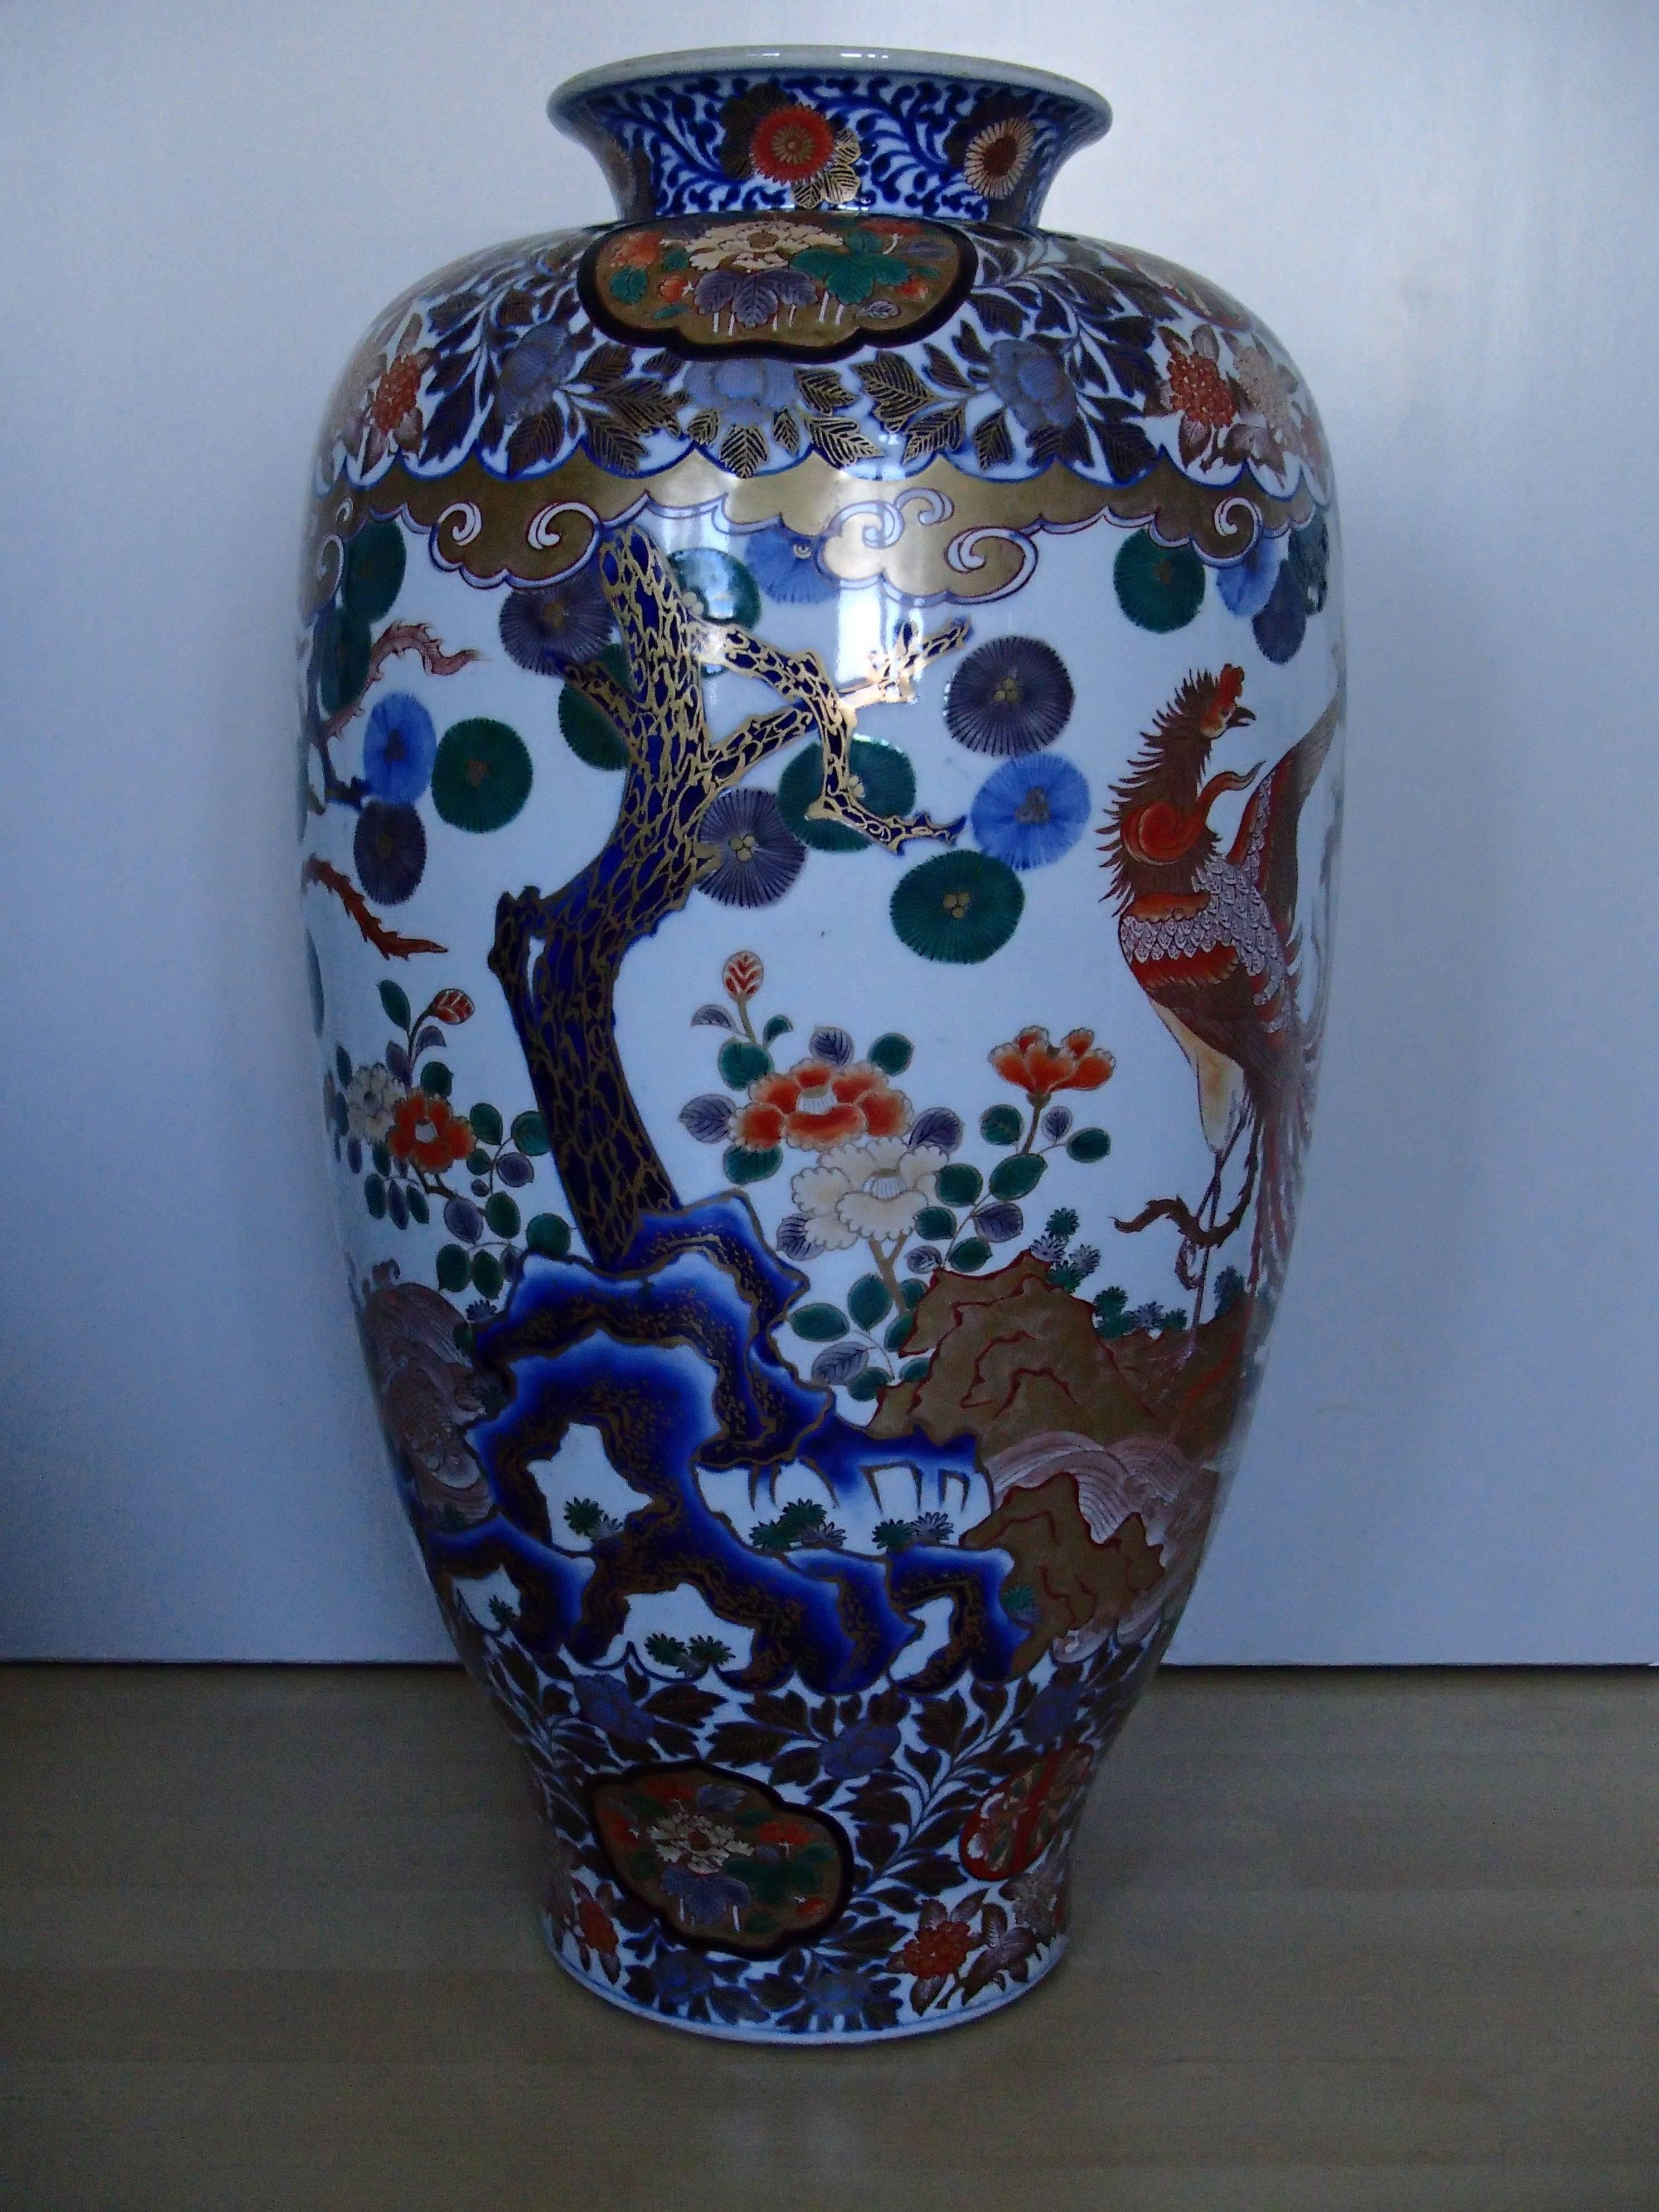 Huge Imari vase with email painted with birds and kiku flowers.